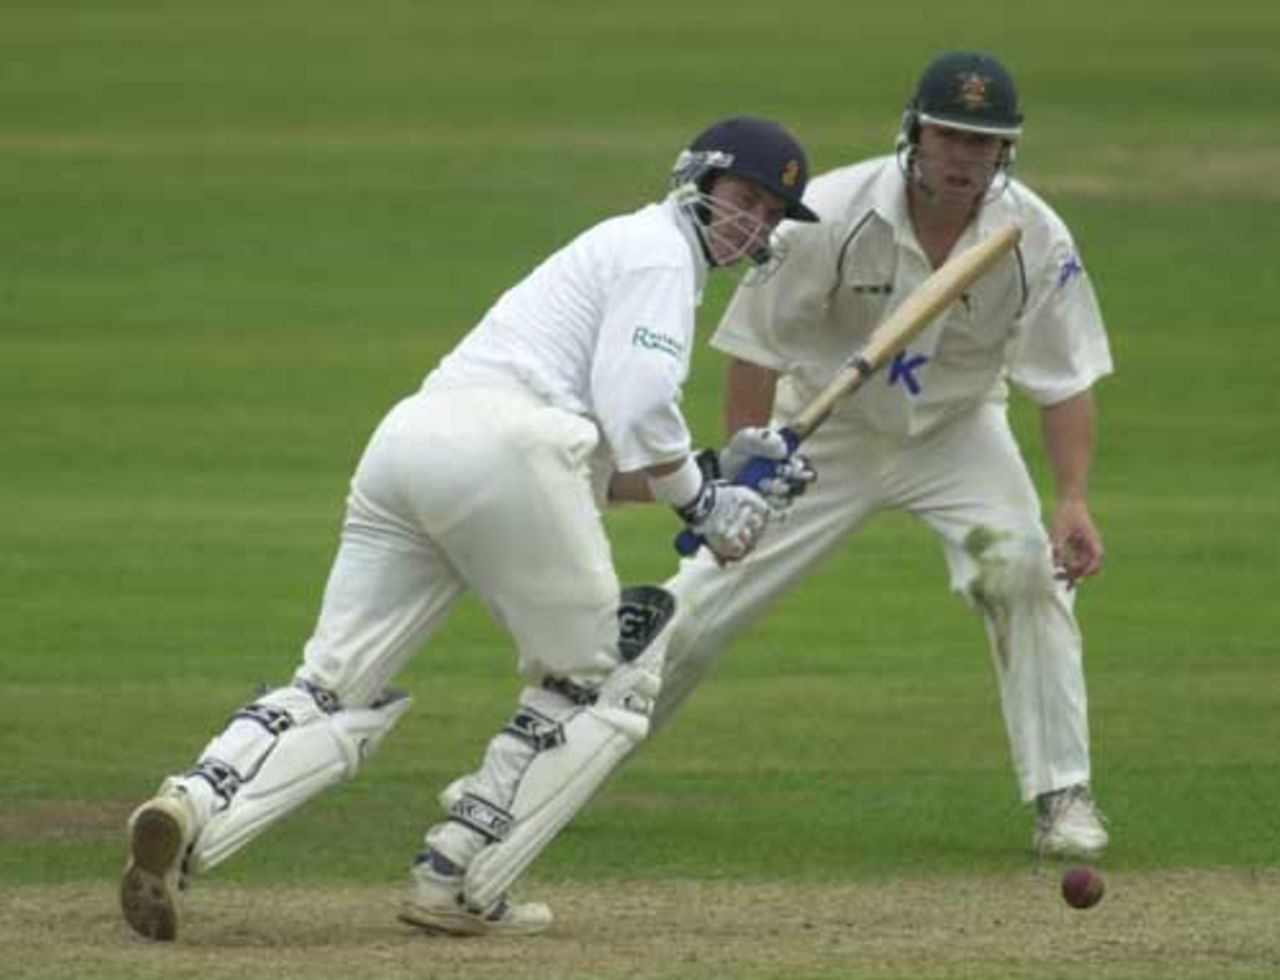 Dowman takes a delivery from Boje at the Grandstand end.  Frizzell County Championship, Derbyshire v Notts, 2002.